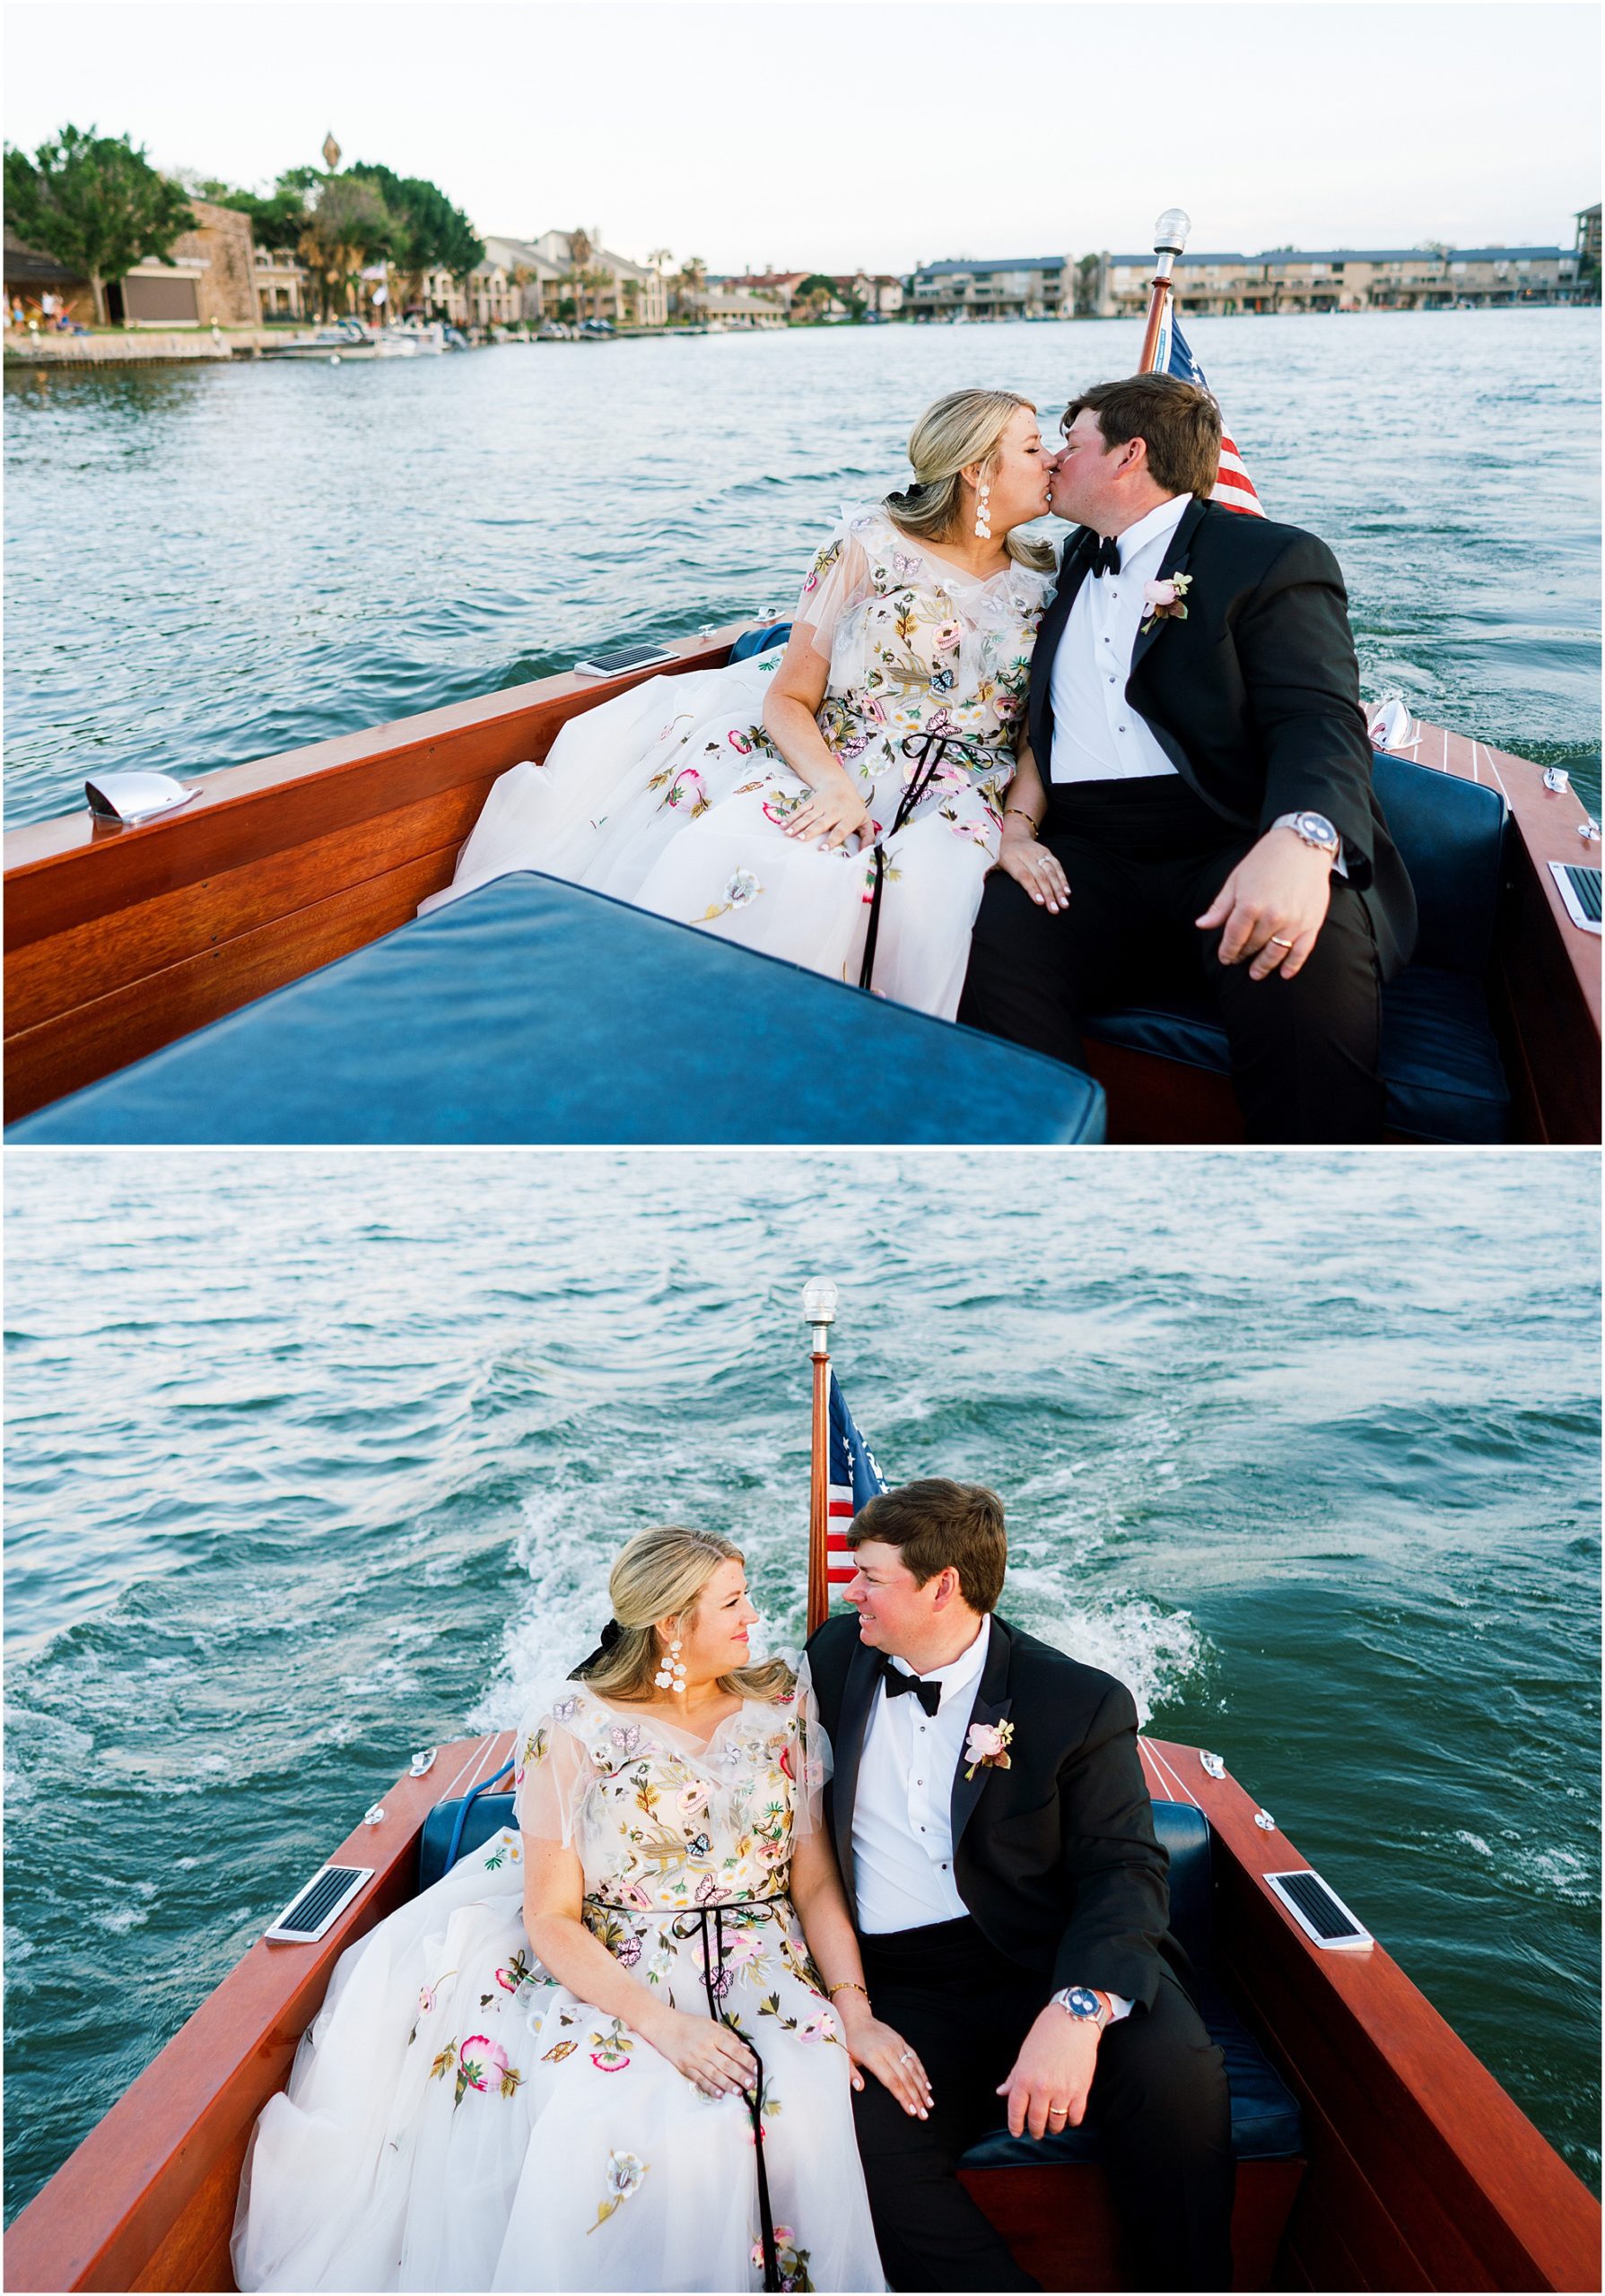 Bride and groom riding a boat to their wedding reception in black and white. Bride in Monique Lhuillier bridal gown with butterflies anf flowers with groom wearing a black tux.